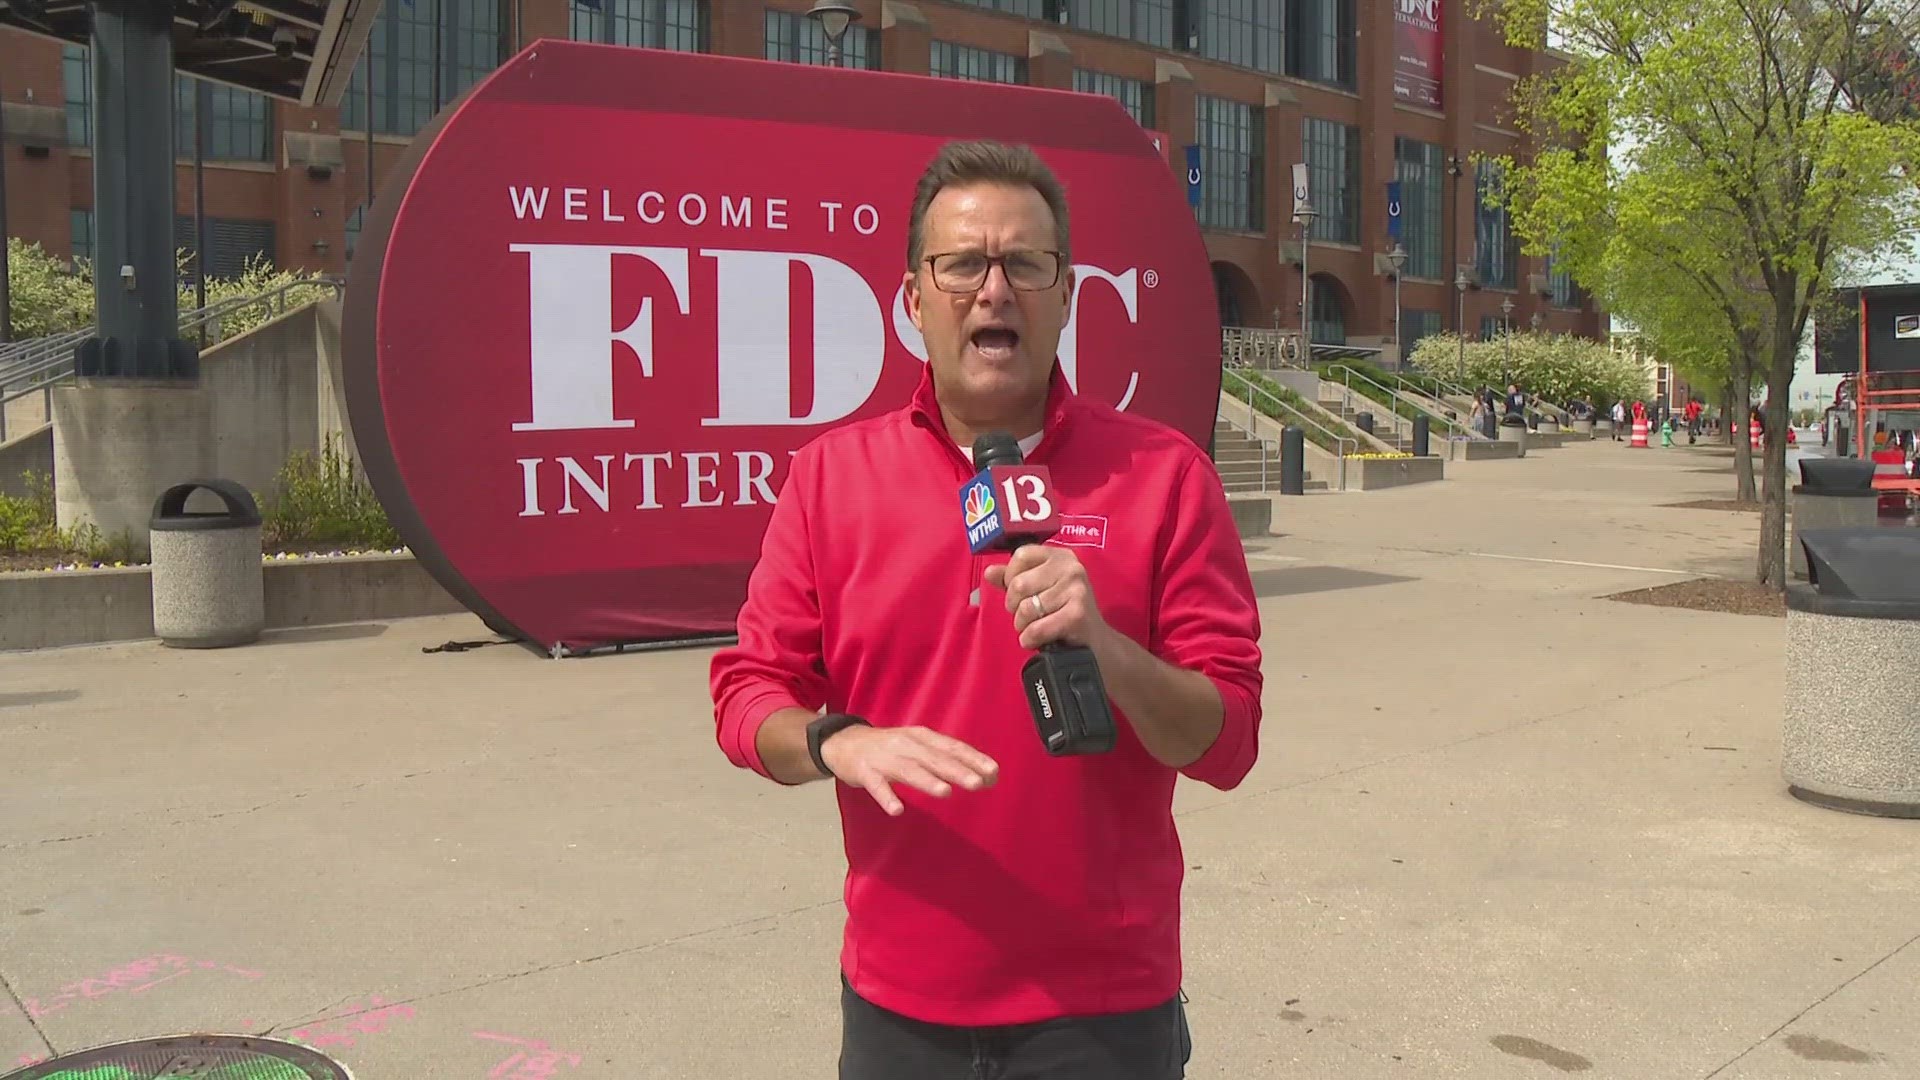 13Sports director Dave Calabro heads to the FDIC Convention in downtown Indianapolis on his weekly quest to find some Good News!